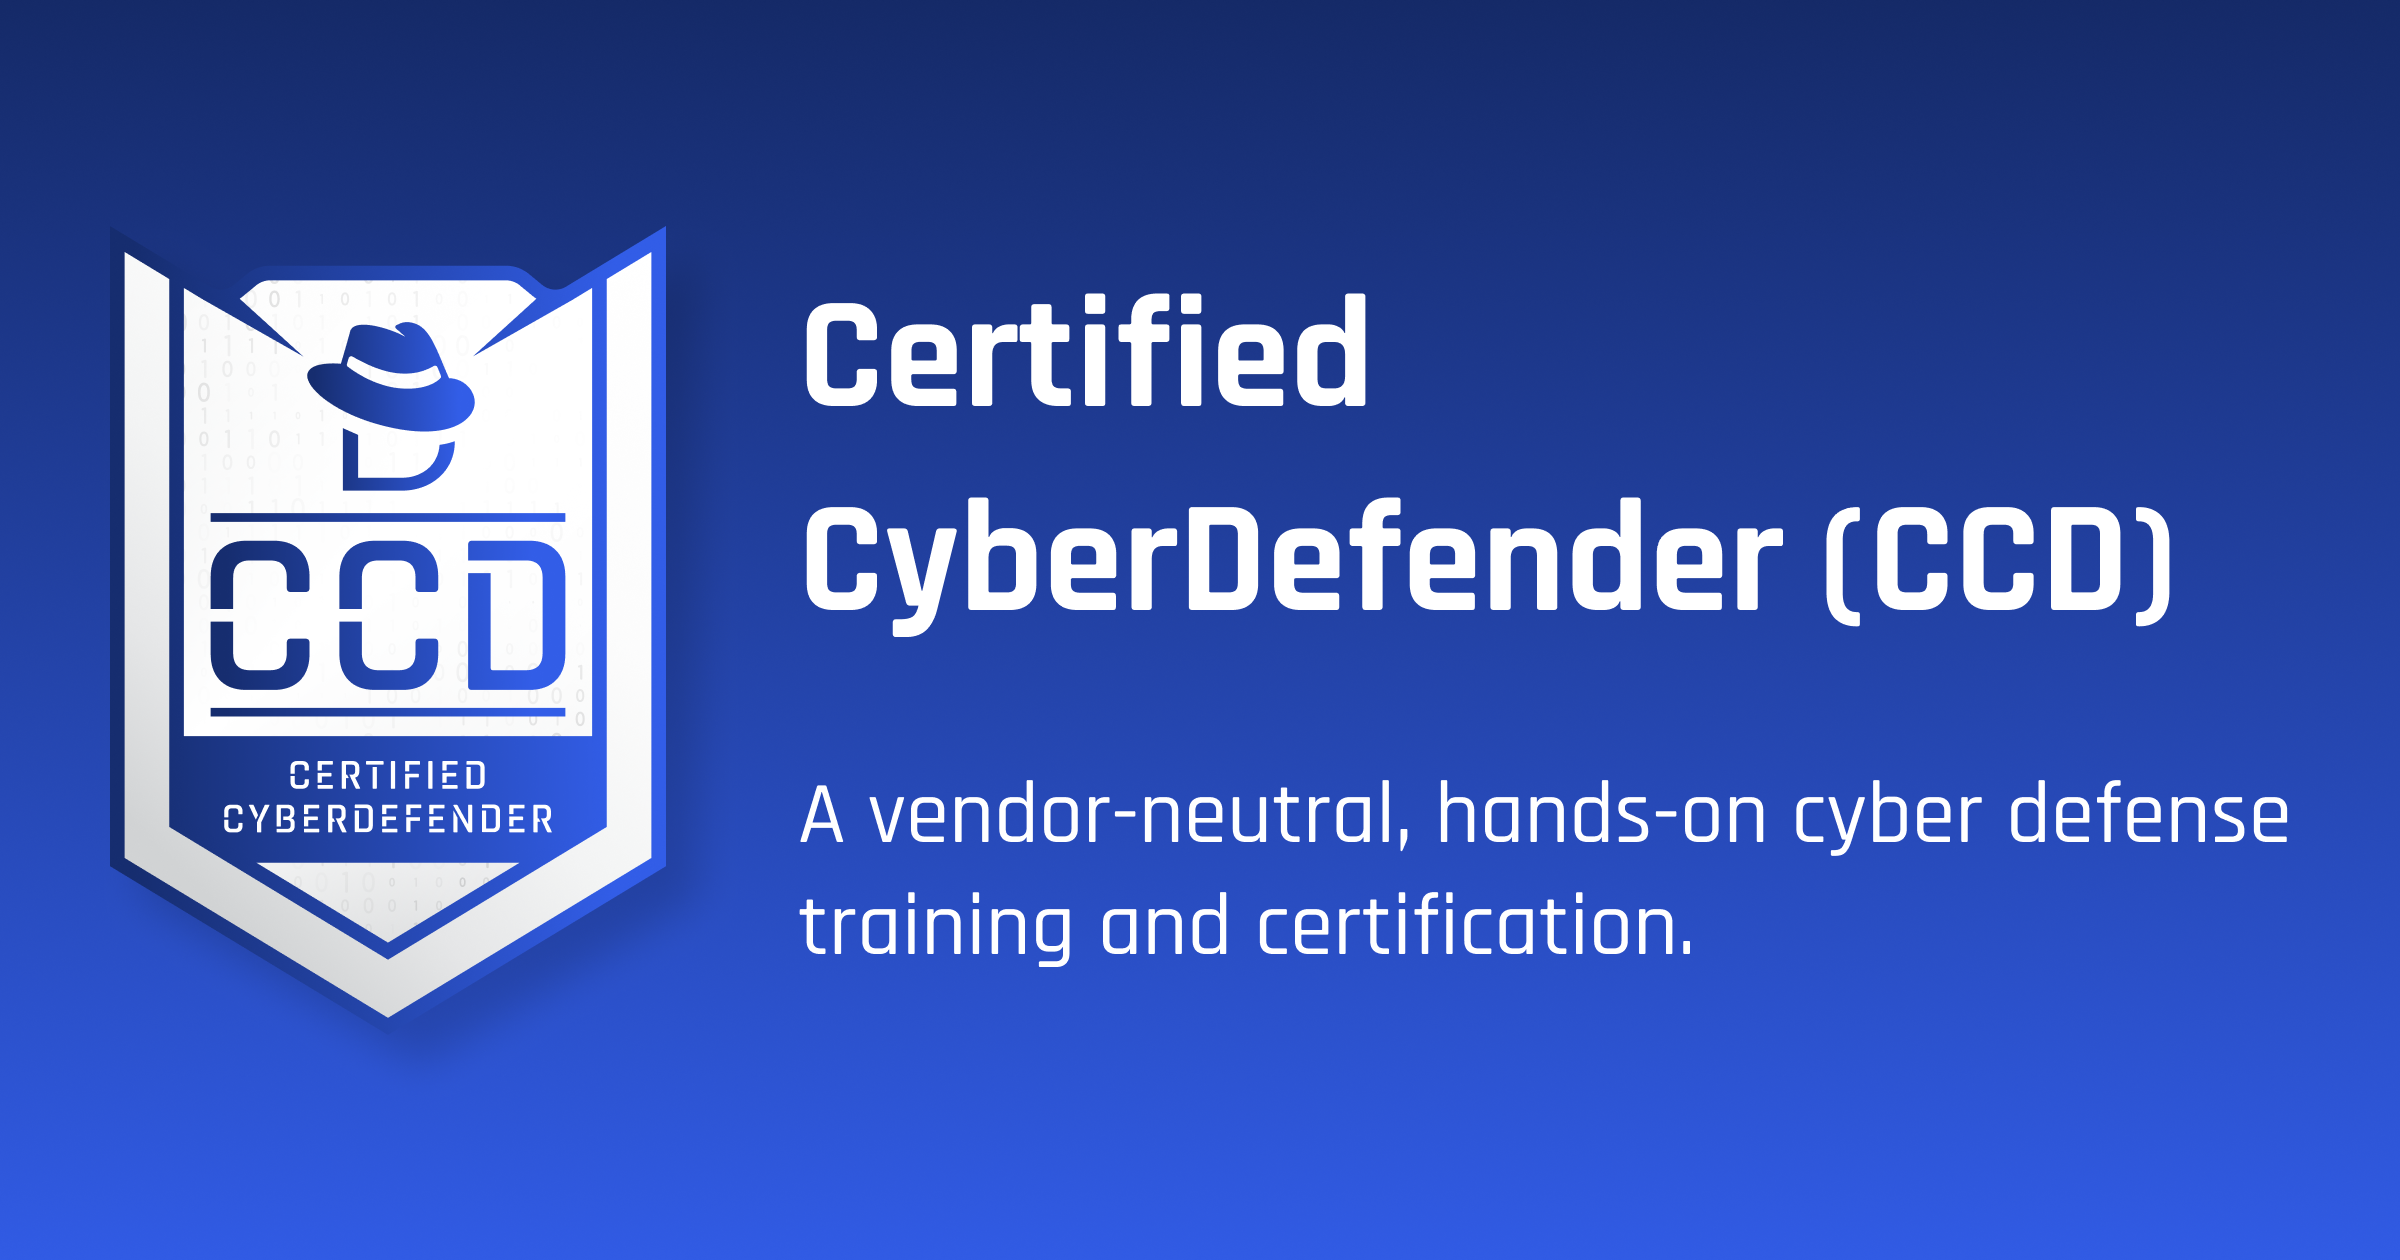 Certified CyberDefender (CCD) A vendor-neutral, hands-on cyber defense training and certification.